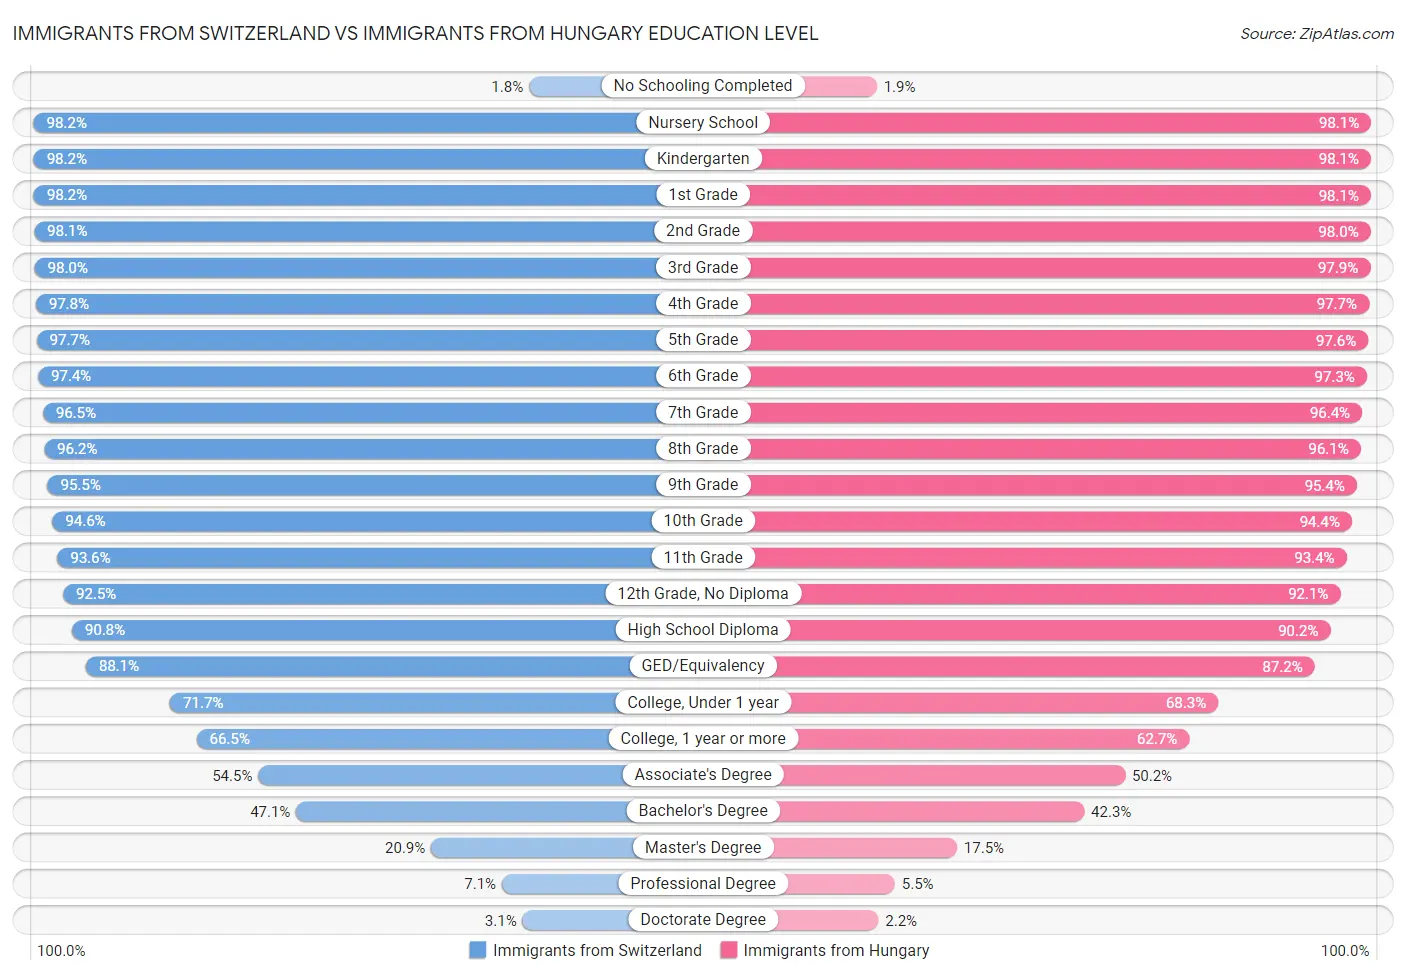 Immigrants from Switzerland vs Immigrants from Hungary Education Level